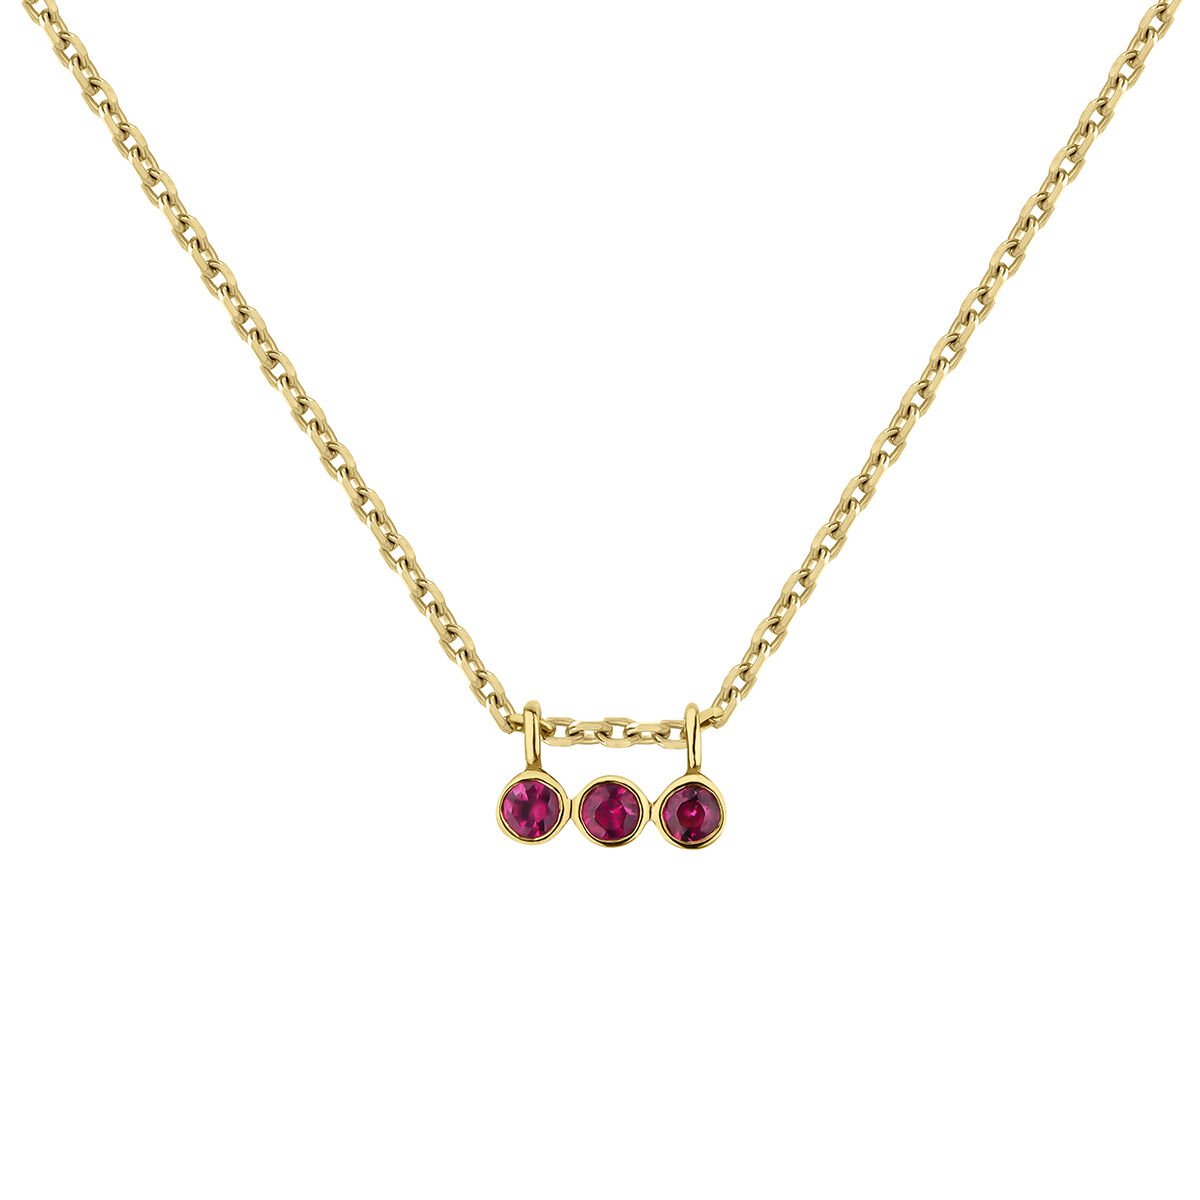 9 ct gold necklace with three ruby spheres, J04982-02-RU, hi-res